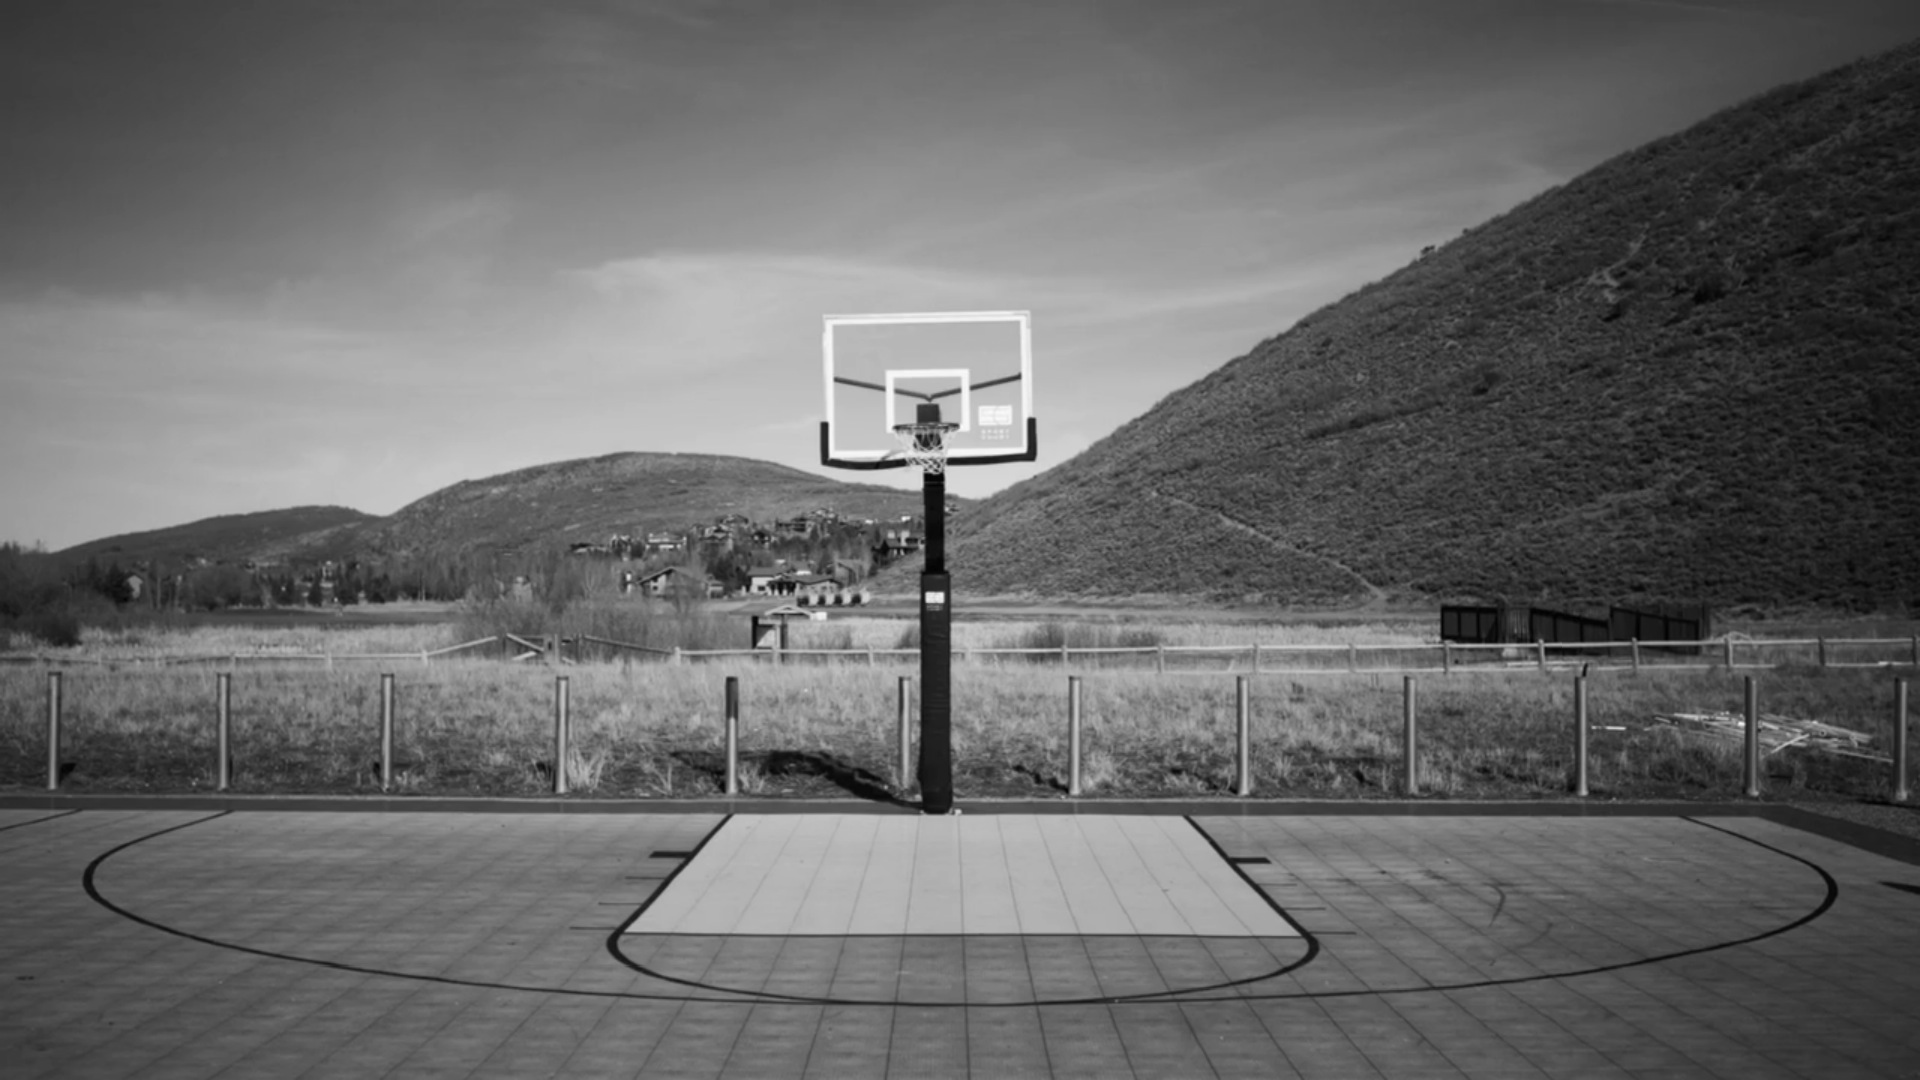 Street Basketball Wallpaper Image Amp Pictures Becuo